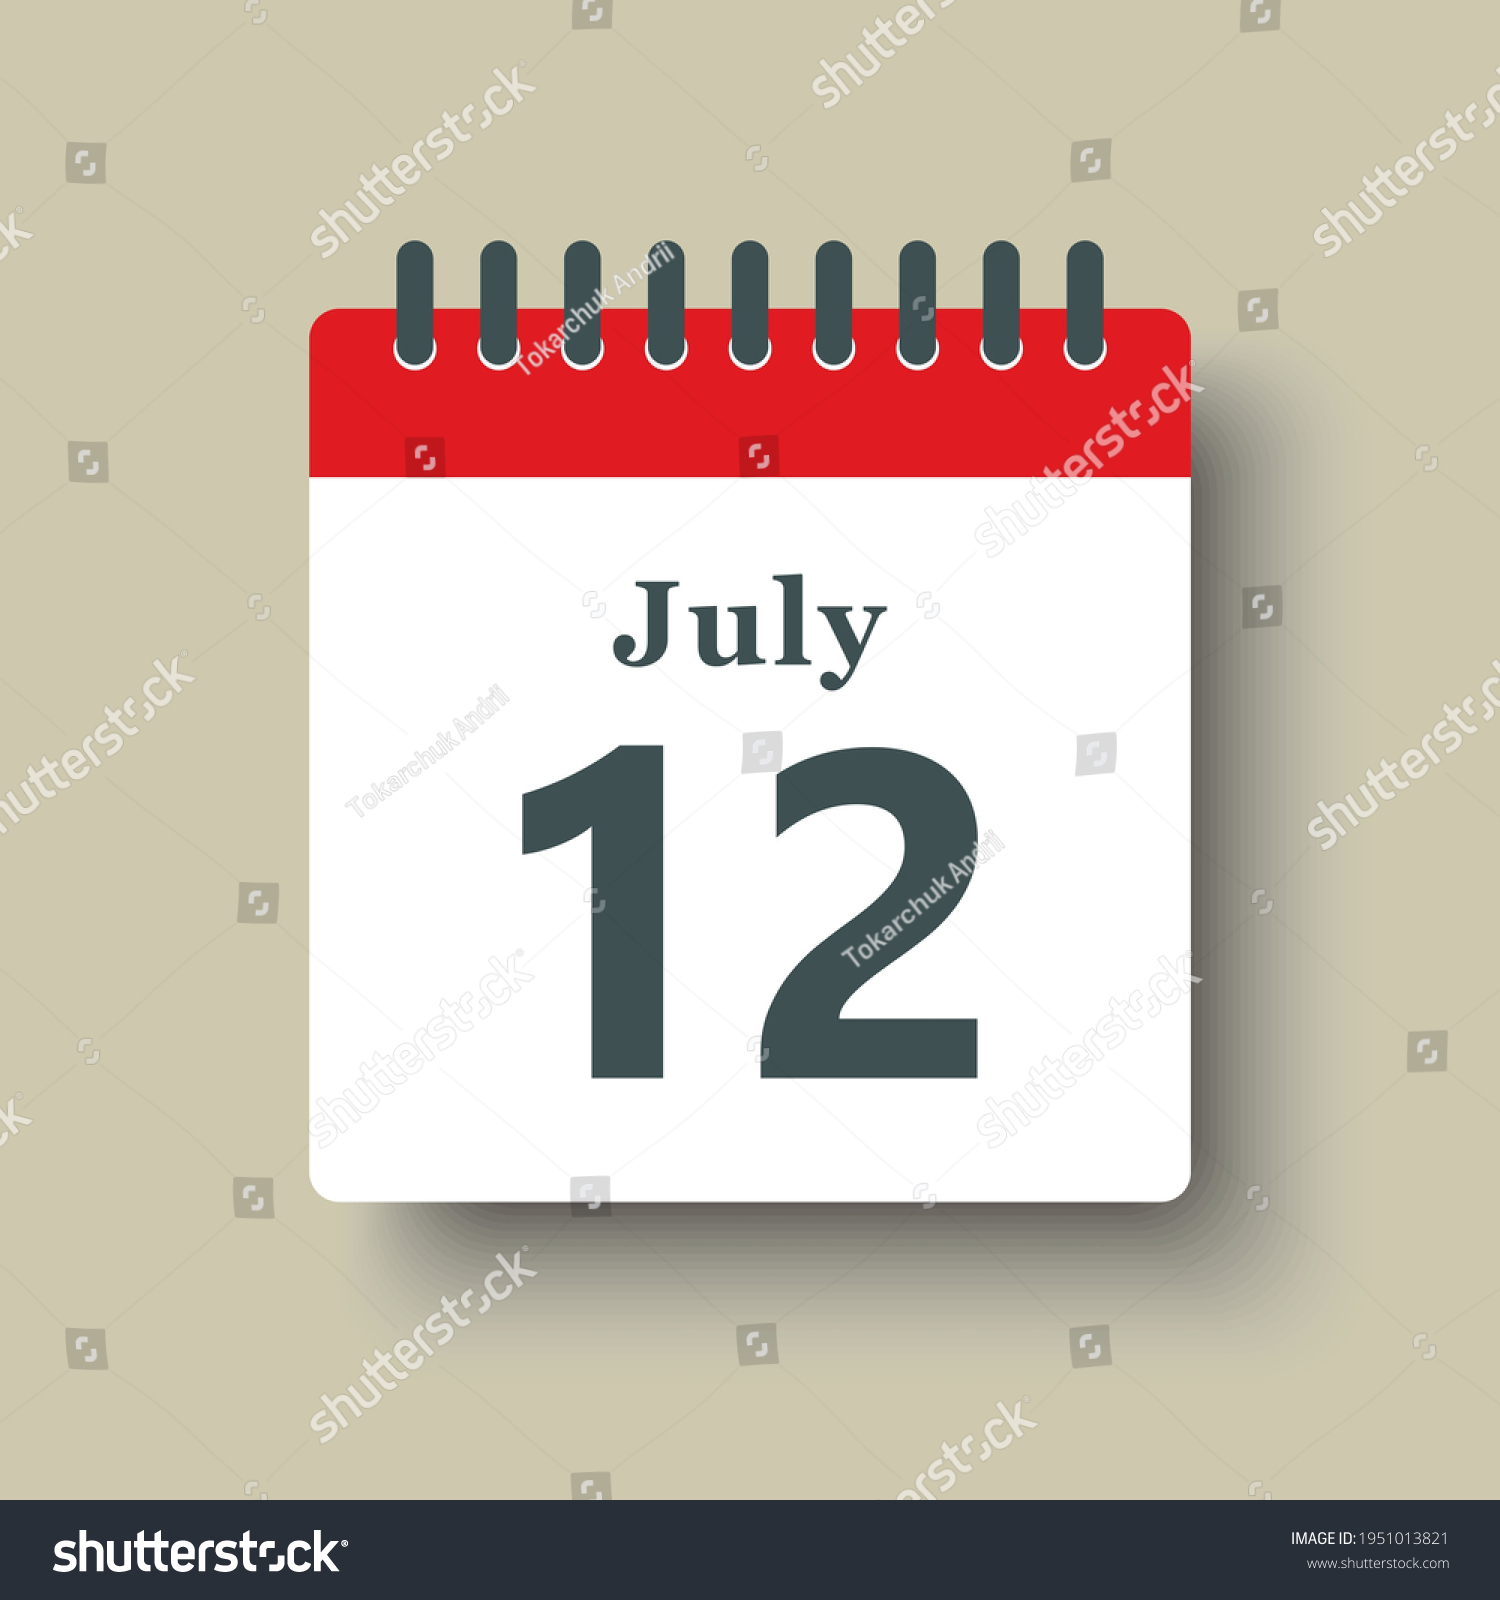 SVG of Icon page calendar day - 12 July. Date day of week Sunday, Monday, Tuesday, Wednesday, Thursday, Friday, Saturday. 12th days of the month, vector illustration flat style. Summer holidays in July svg